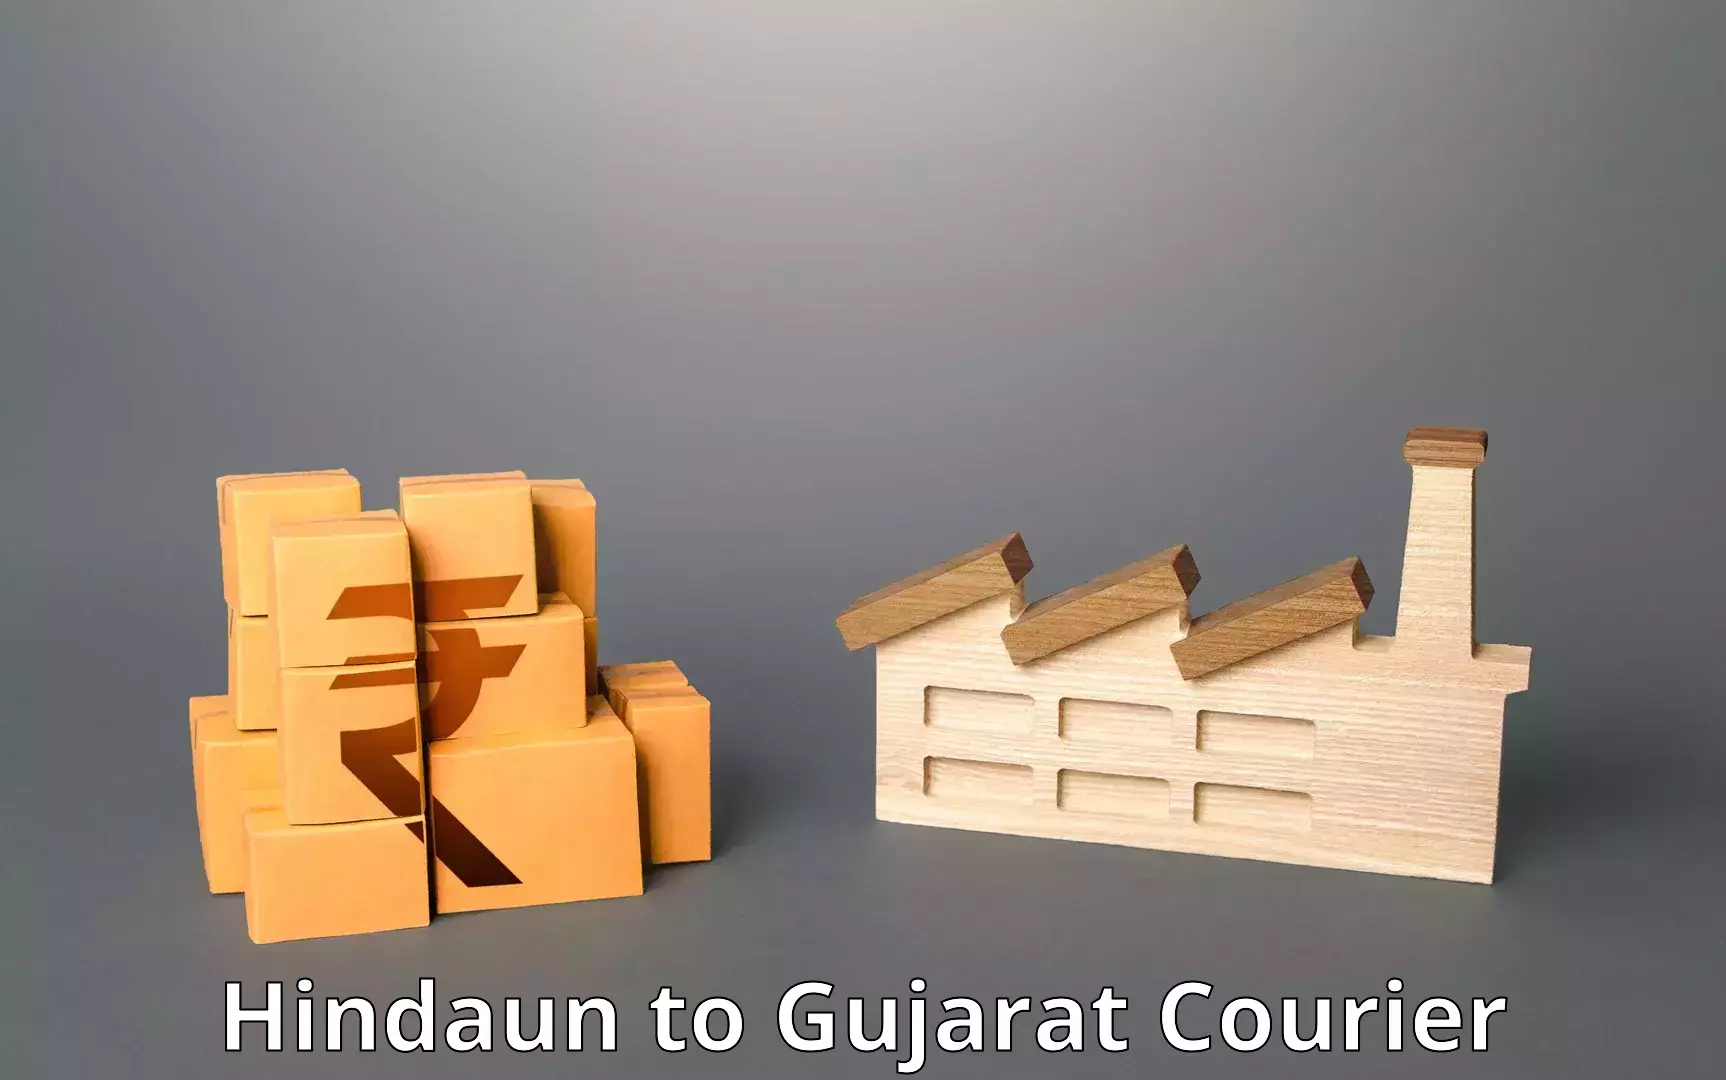 Cash on delivery service Hindaun to Gujarat